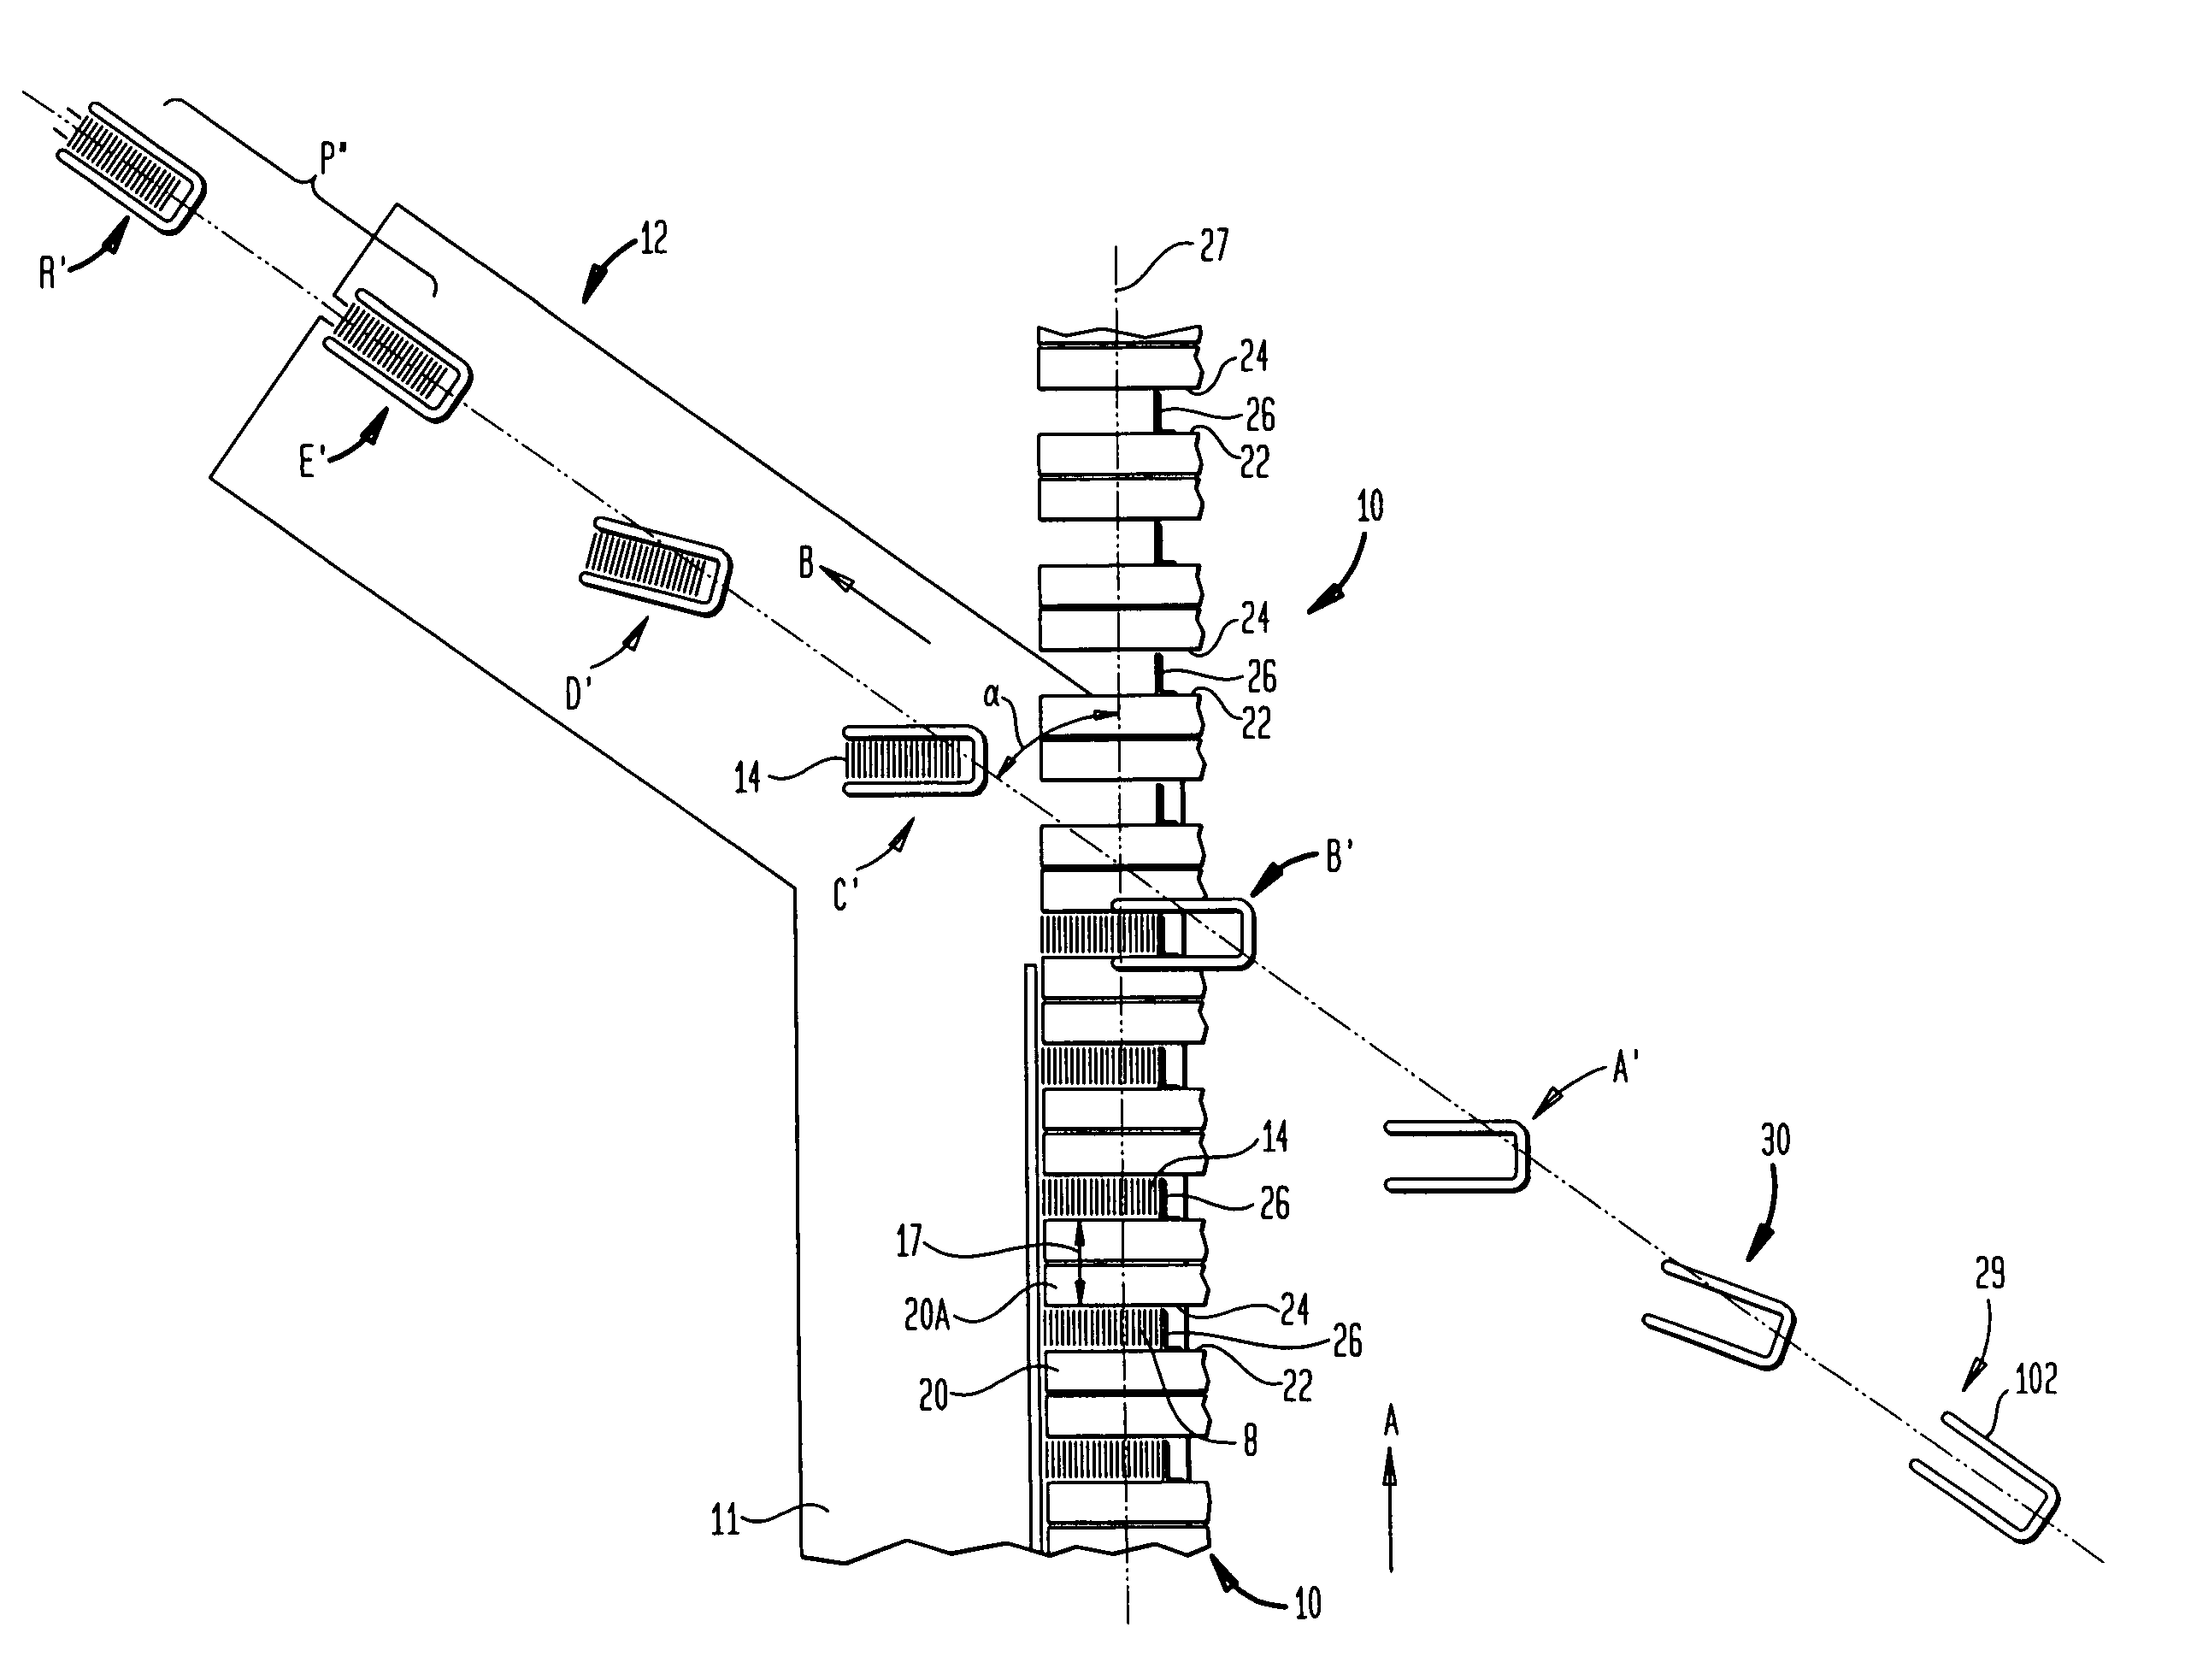 Continuous motion product transfer system with conveyors